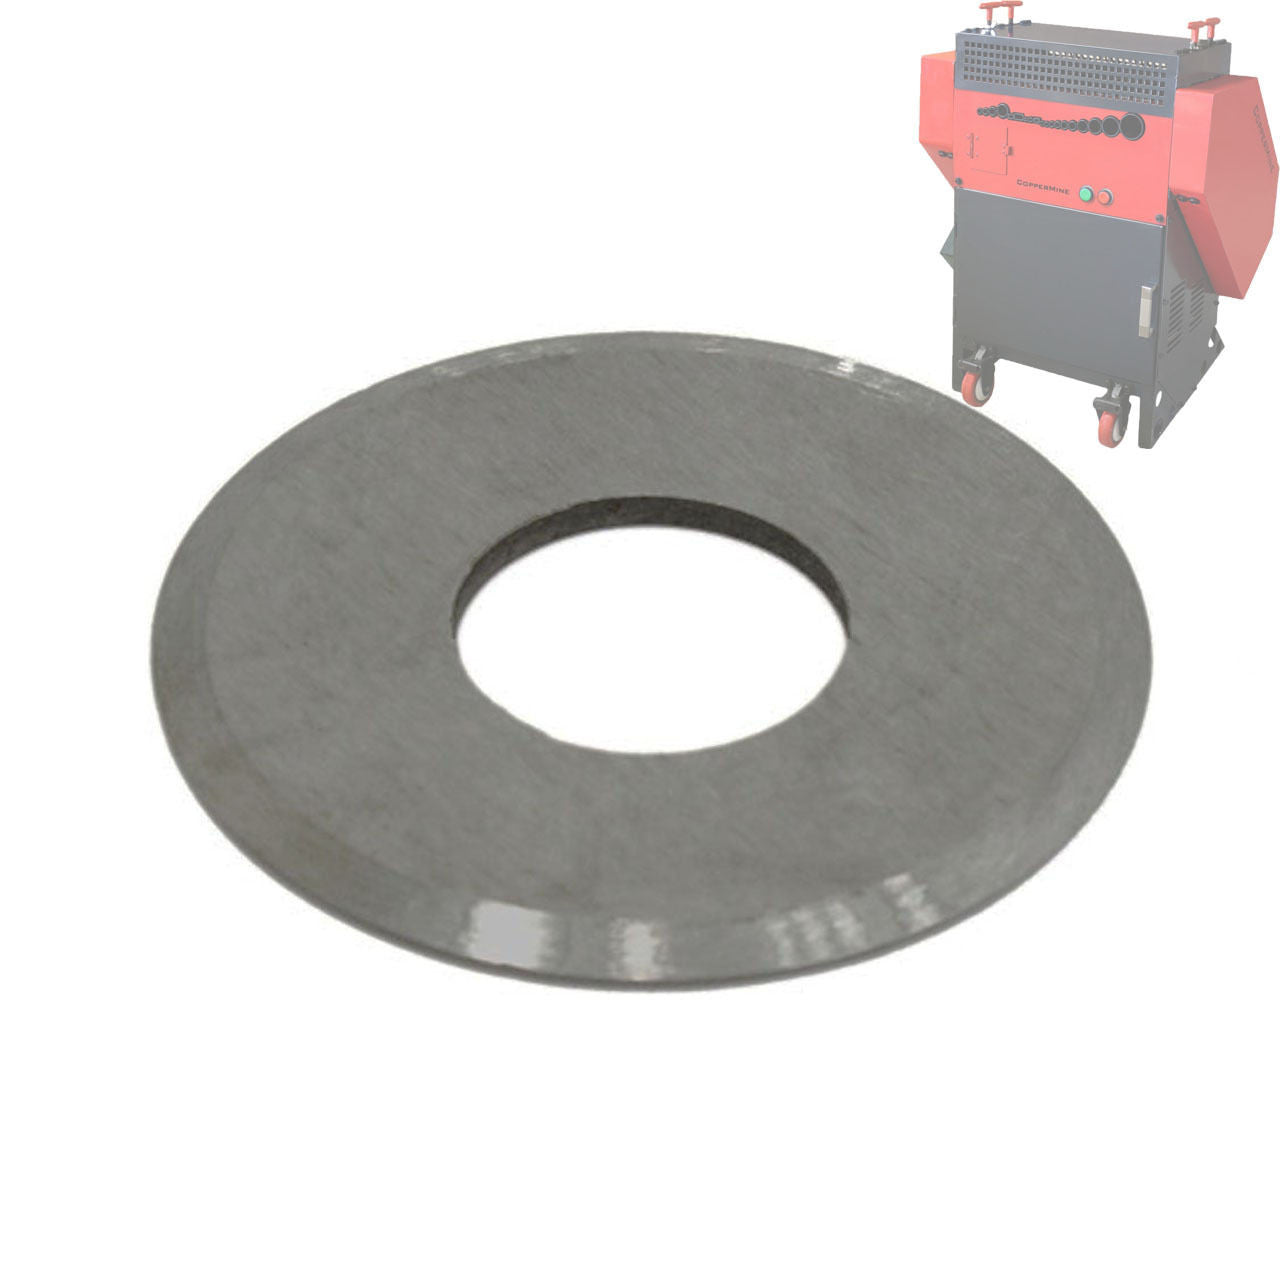 Replacement Blade for CopperMine Industrial Wire Stripping Machine Model 500